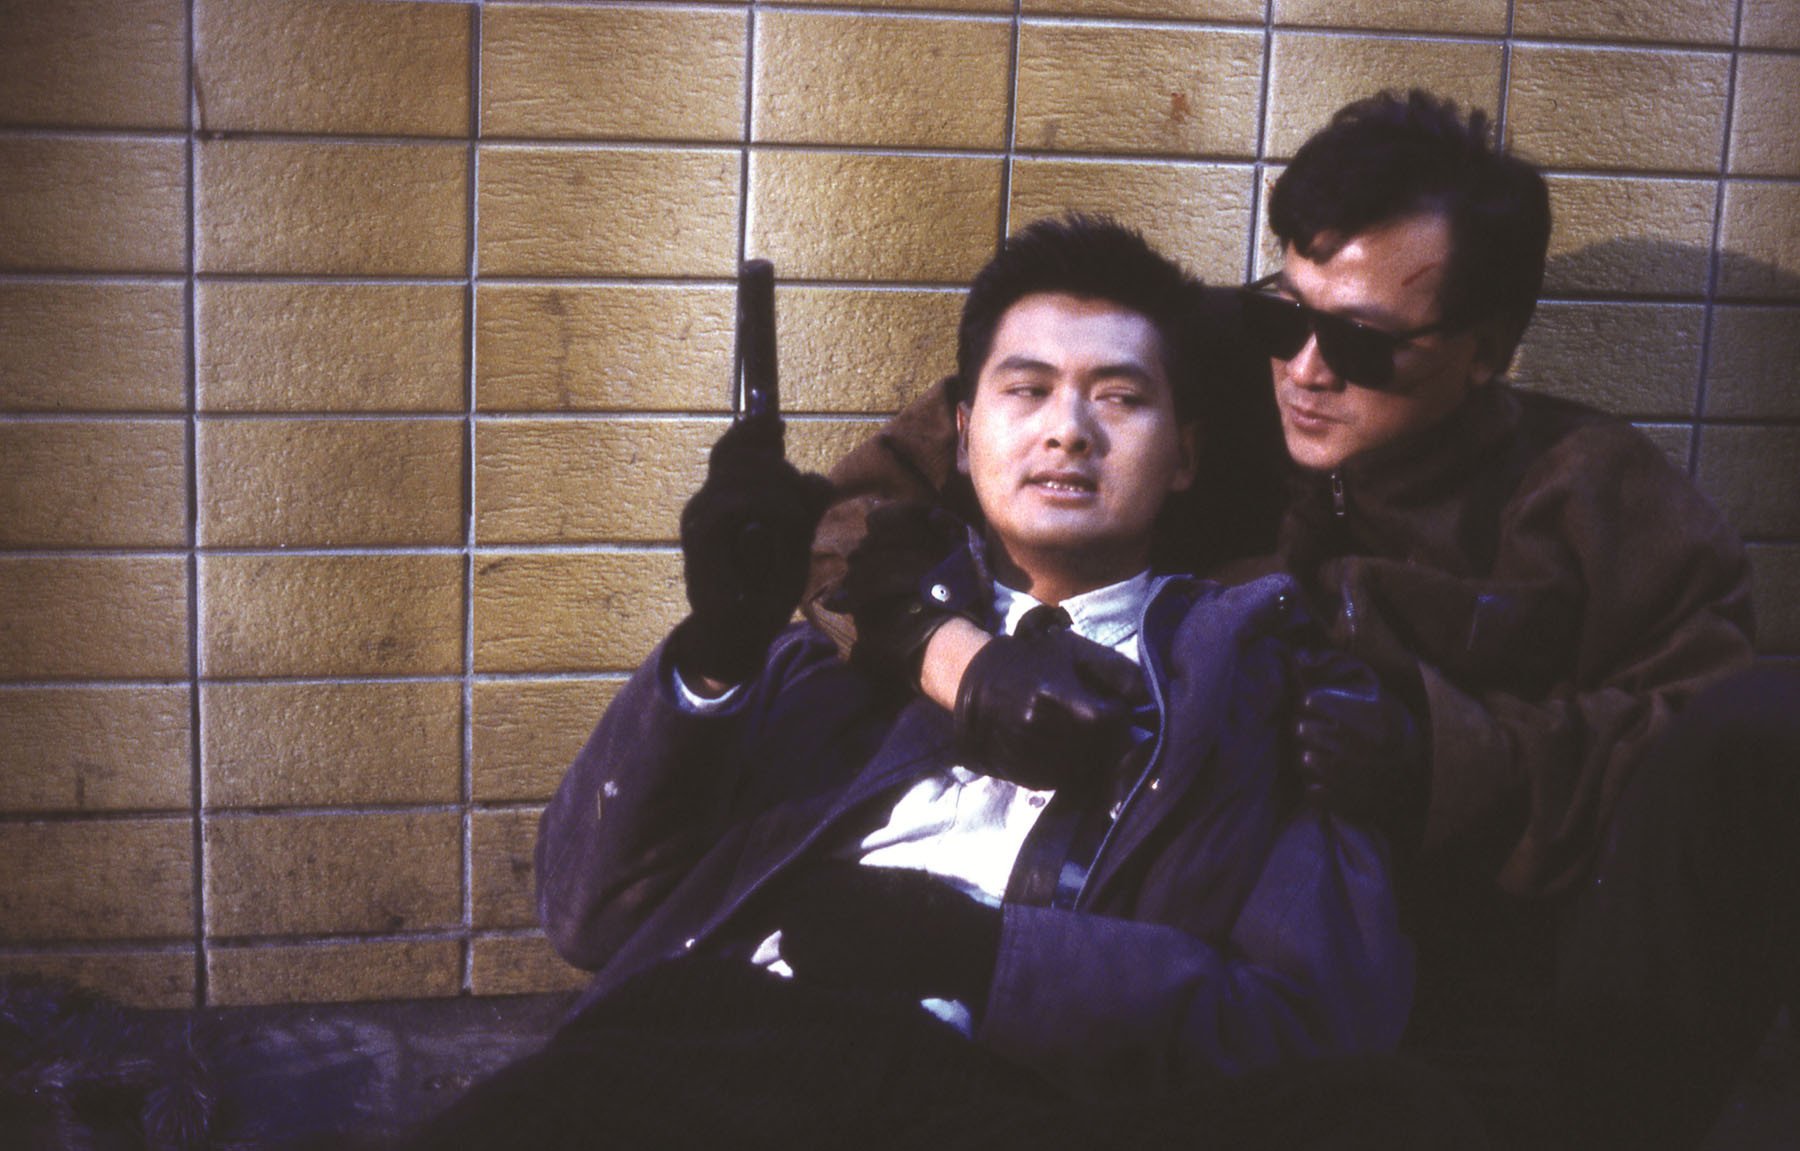 Chow Yun-fat (left) and Danny Lee in a still from City on Fire, Ringo Lam’s influential 1987 crime film about the bond between a policeman and a triad gang member. Photo: courtesy of Hong Kong Film Archive